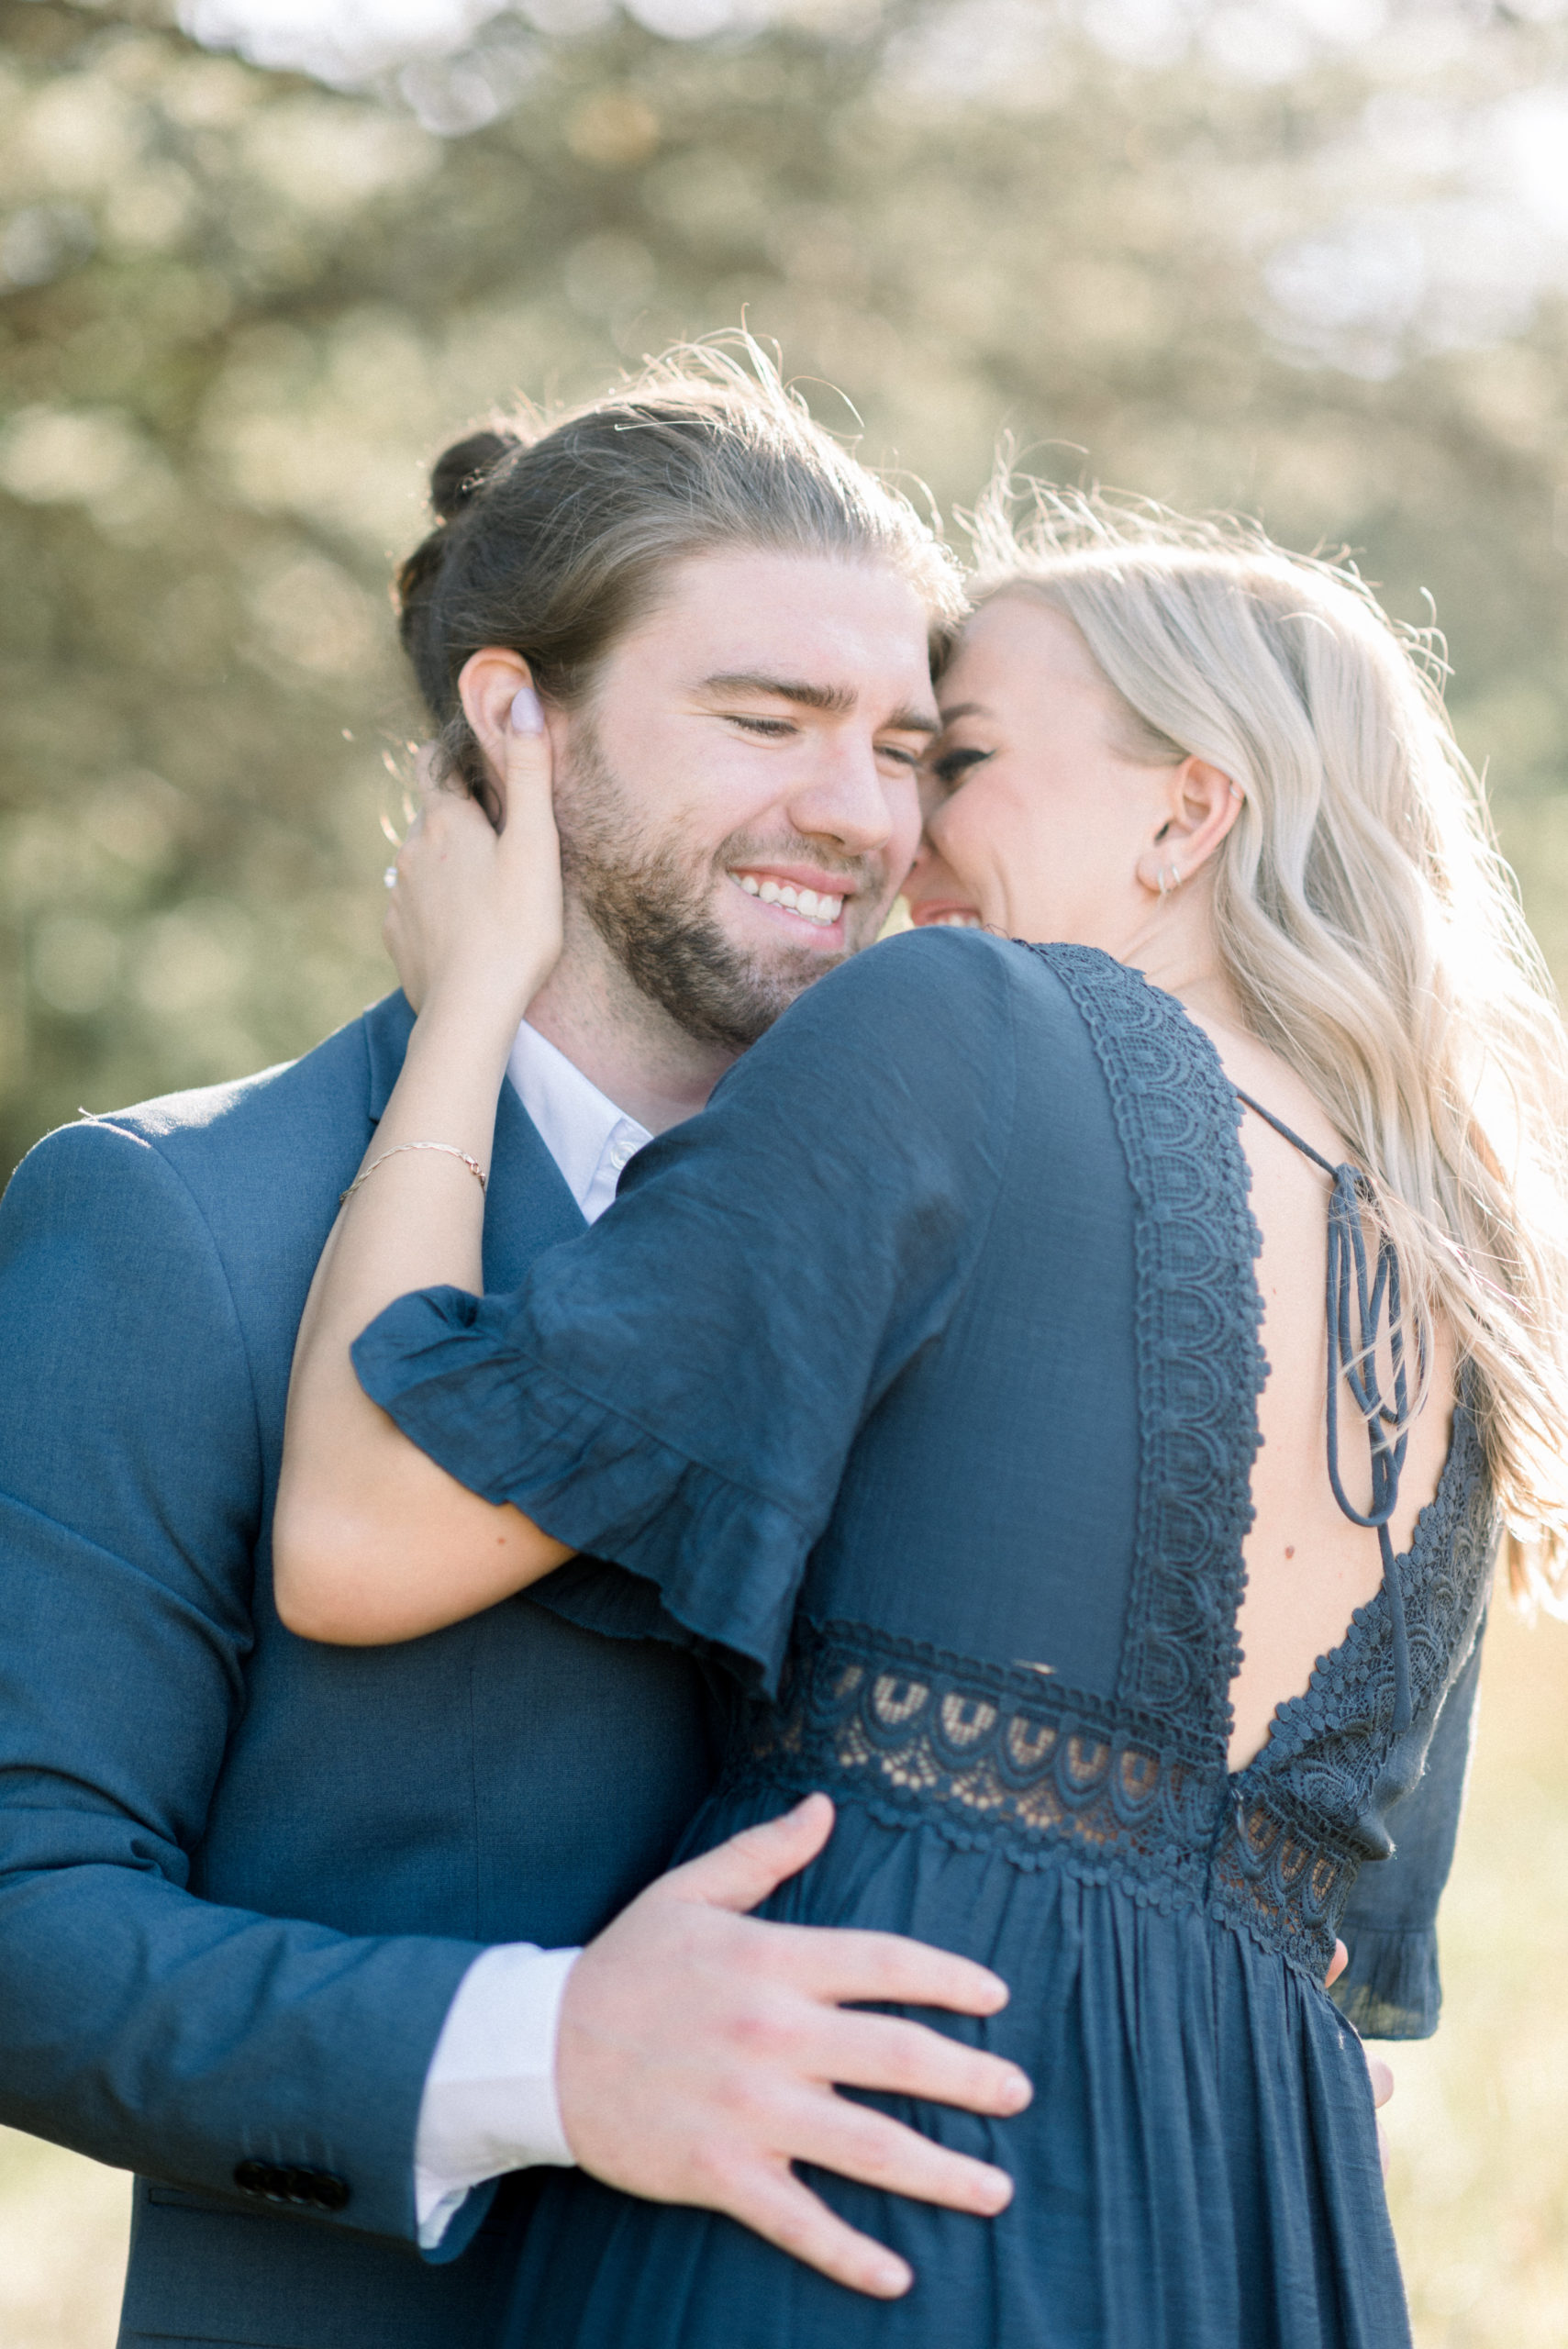 newly engaged couple laughing and embracing during engagement portraits